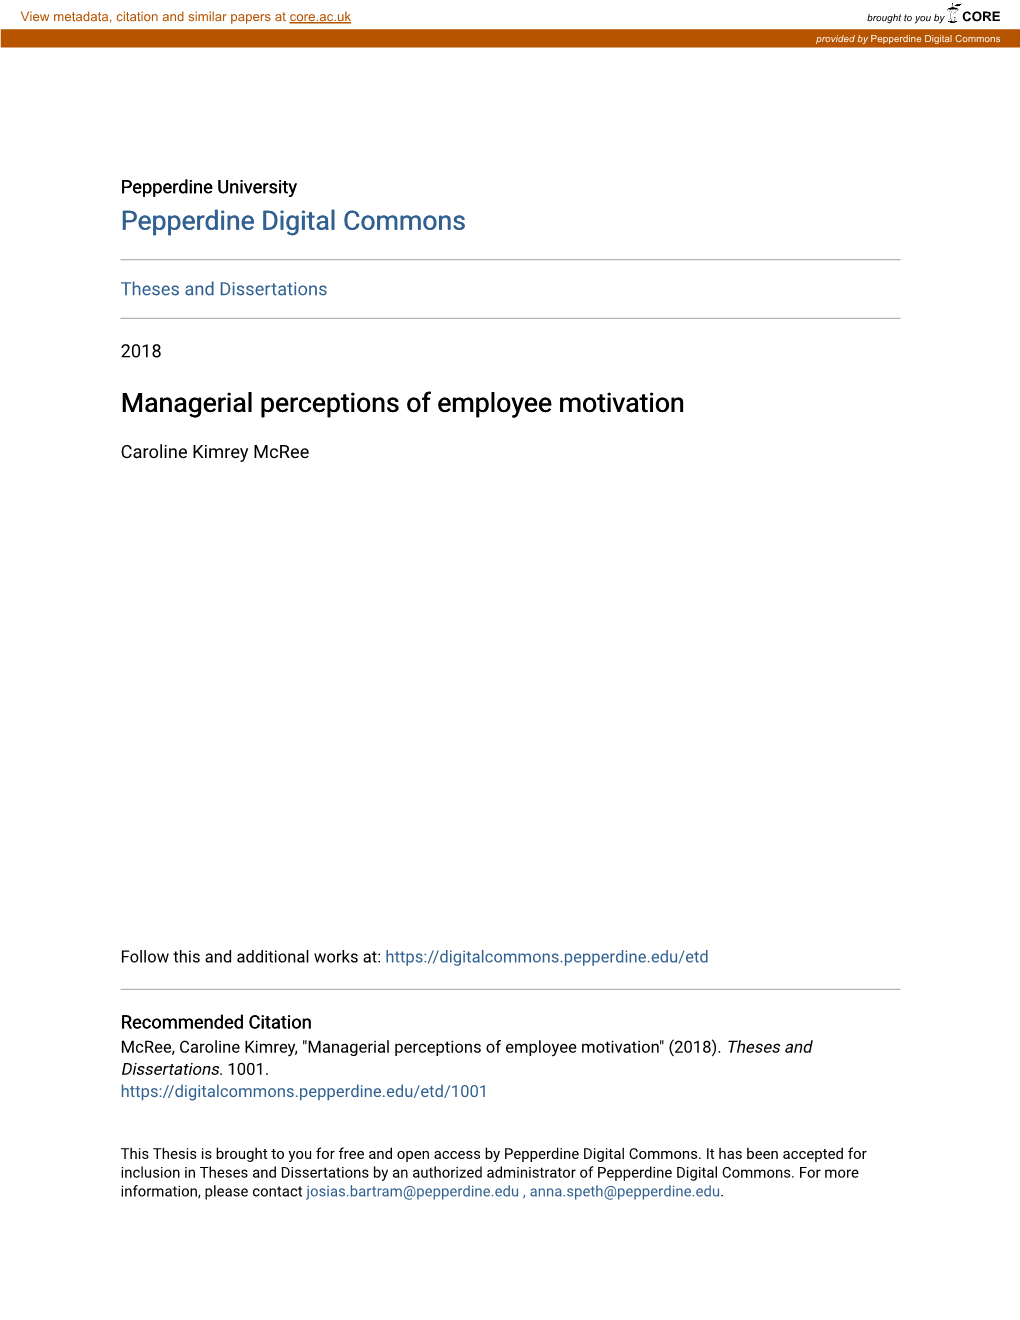 Managerial Perceptions of Employee Motivation